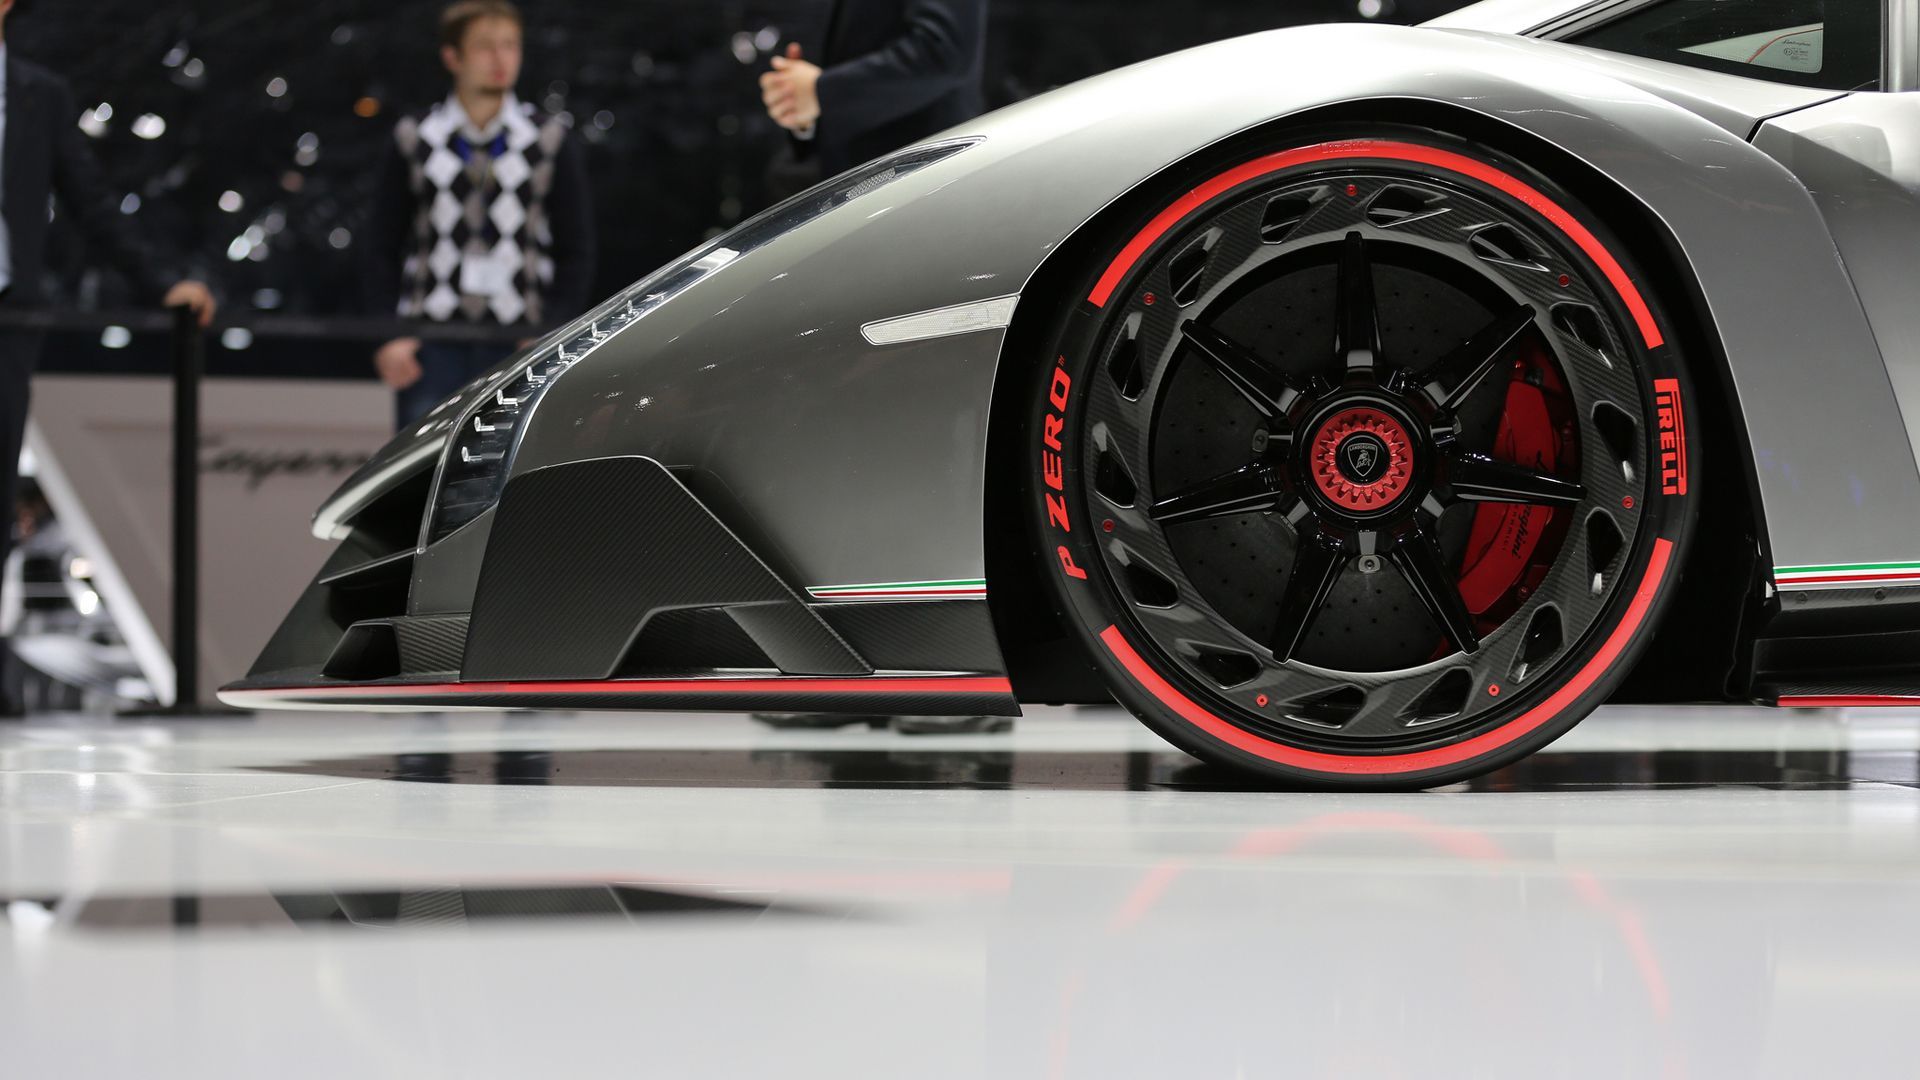 Your Ridiculously Extreme Lamborghini Veneno Wallpaper Is Here